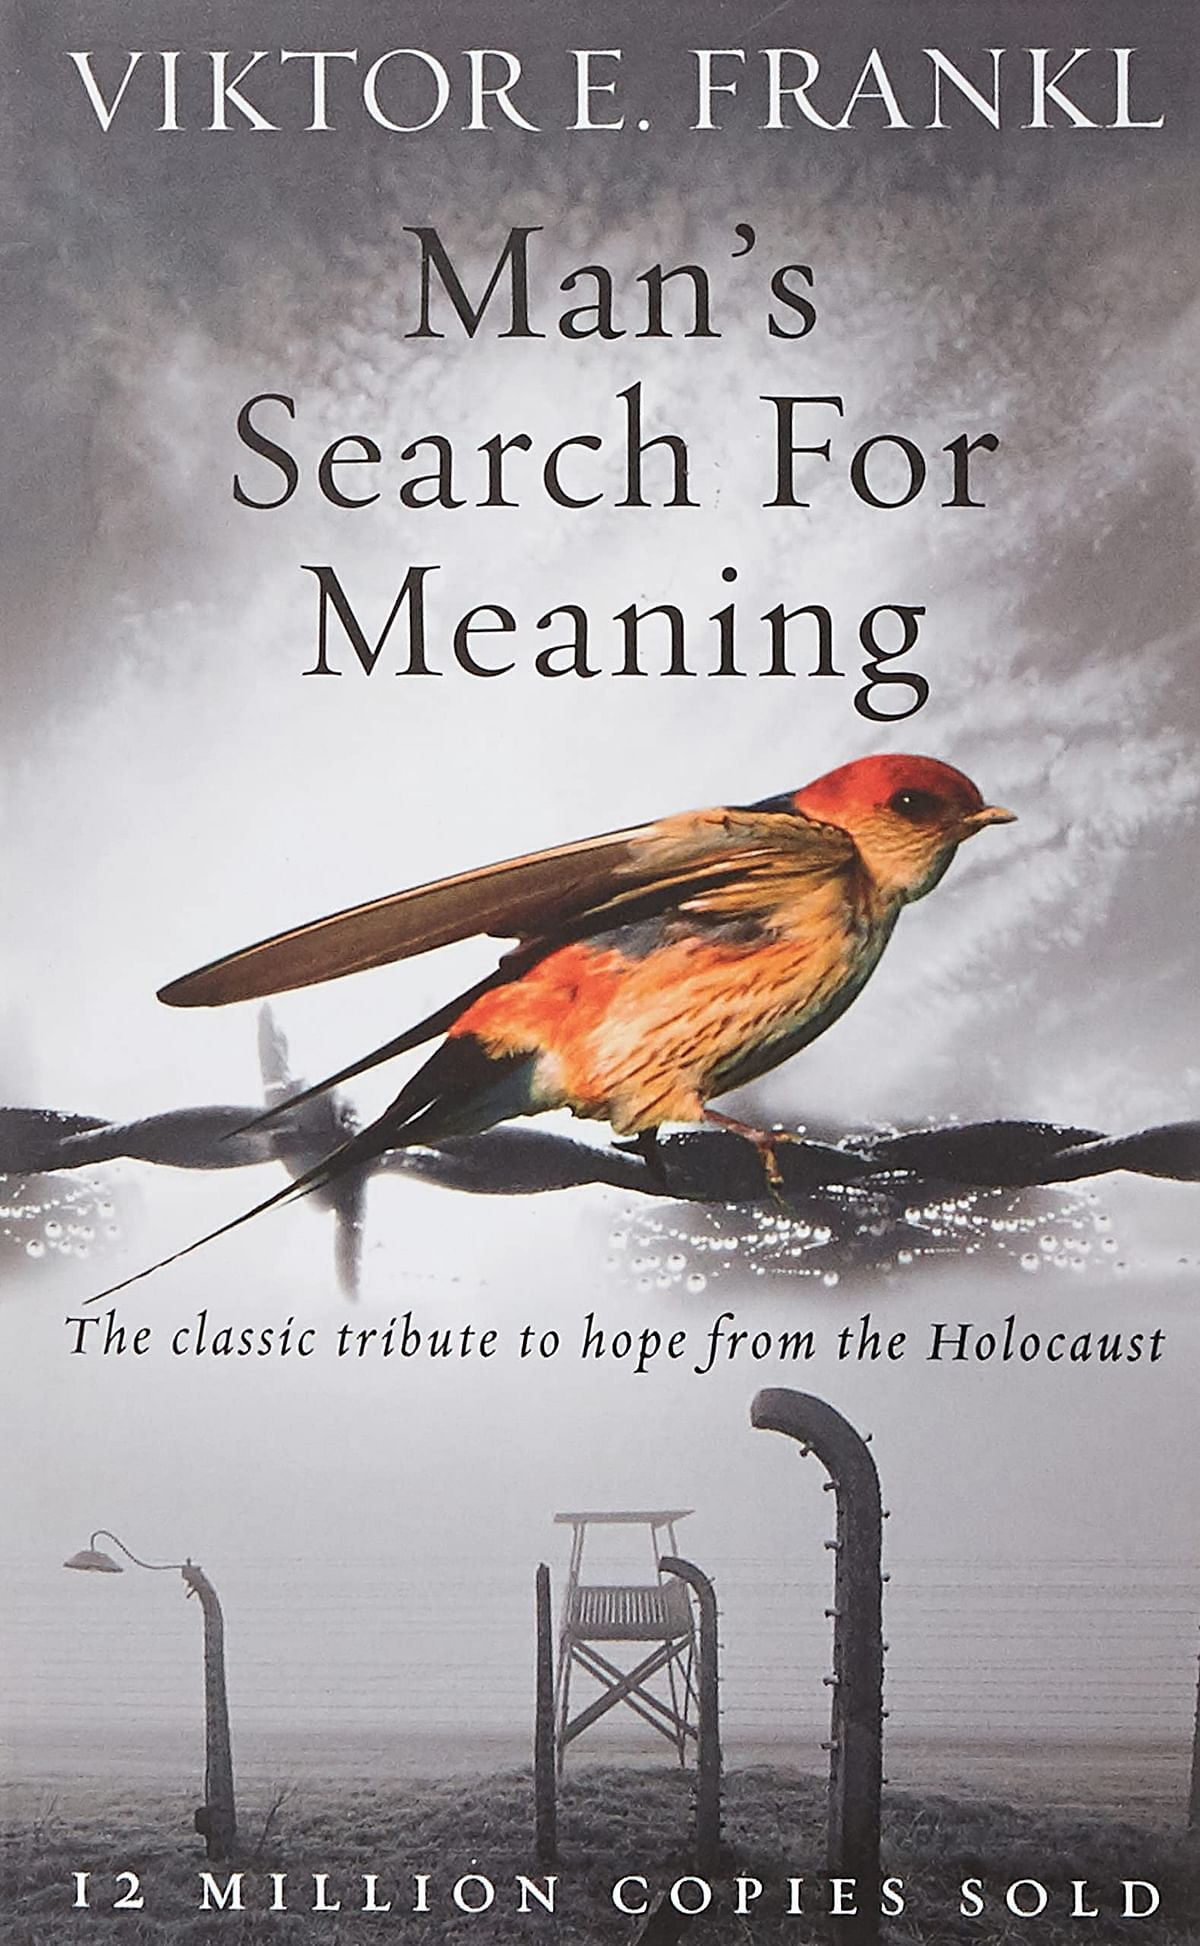  Man's Search for Meaning